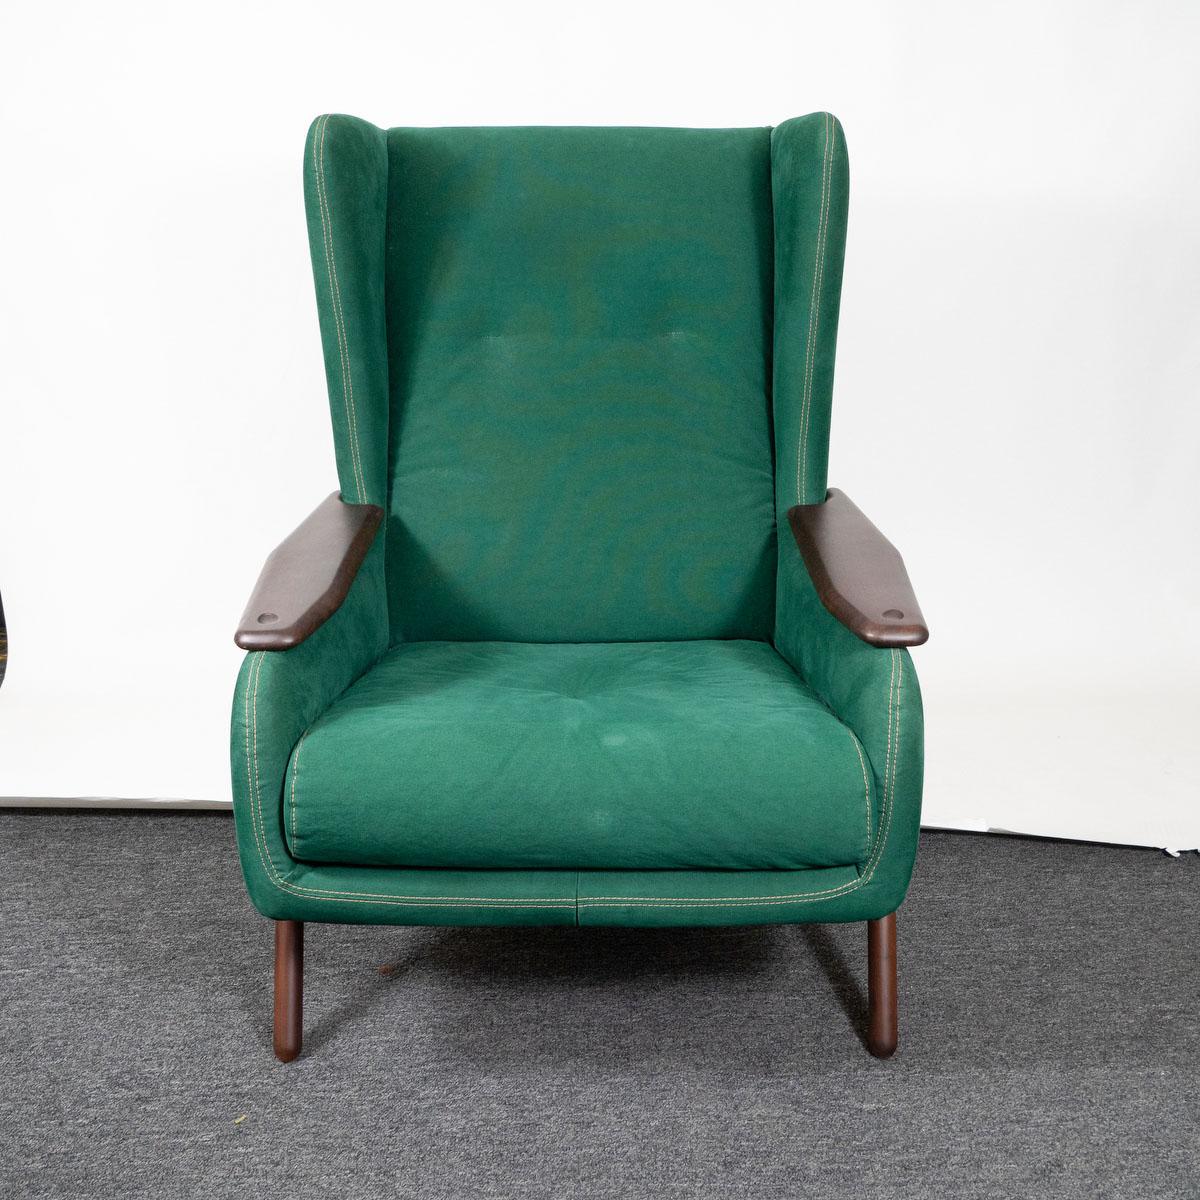 Mid-20th Century Green Upholstered Wingback Chair with Ottoman by Paolo Alvez For Sale